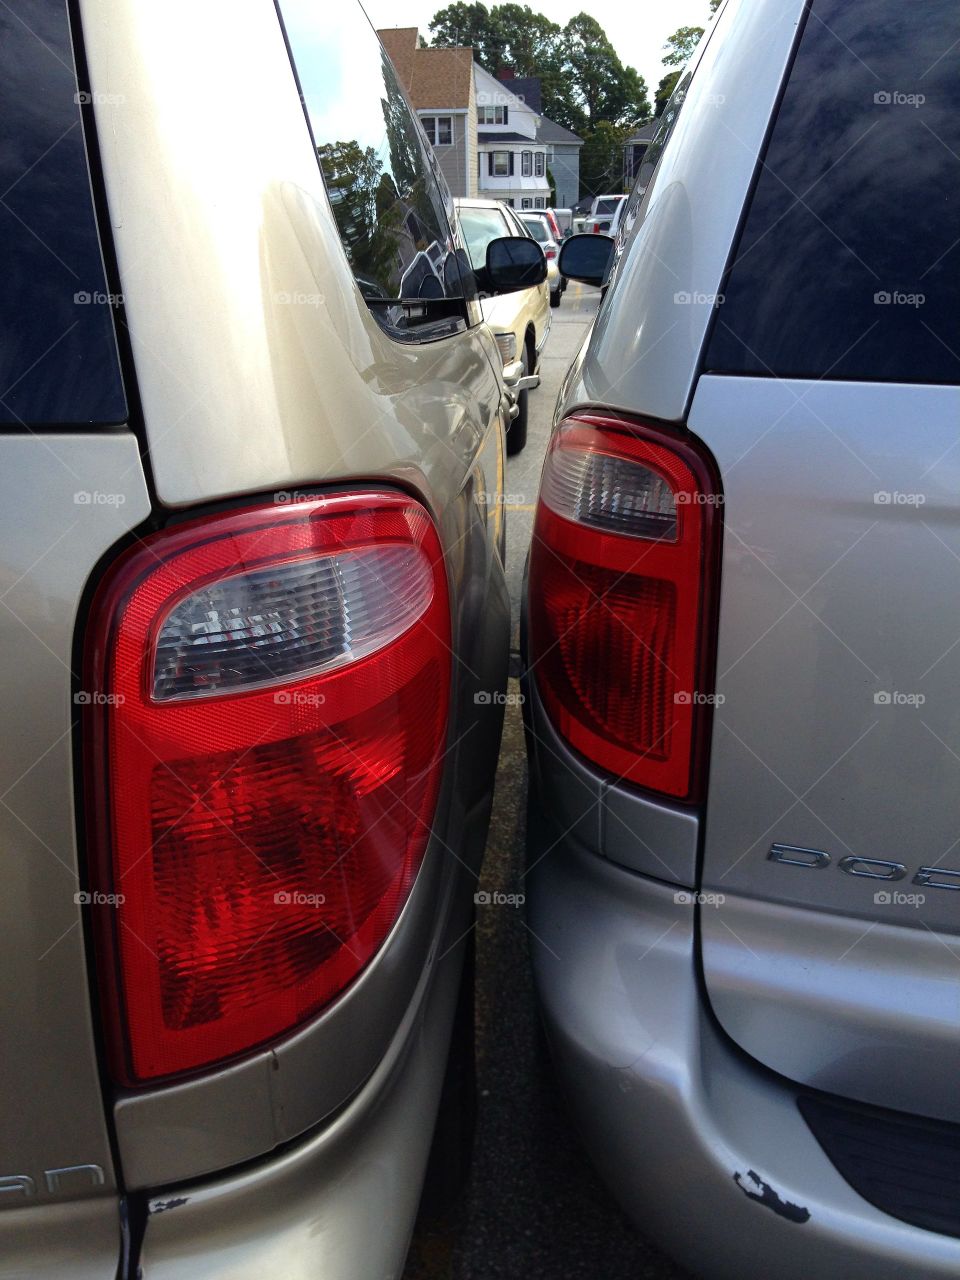 Bad Parking in parking lot. Scraped up & dented cars. Accident.